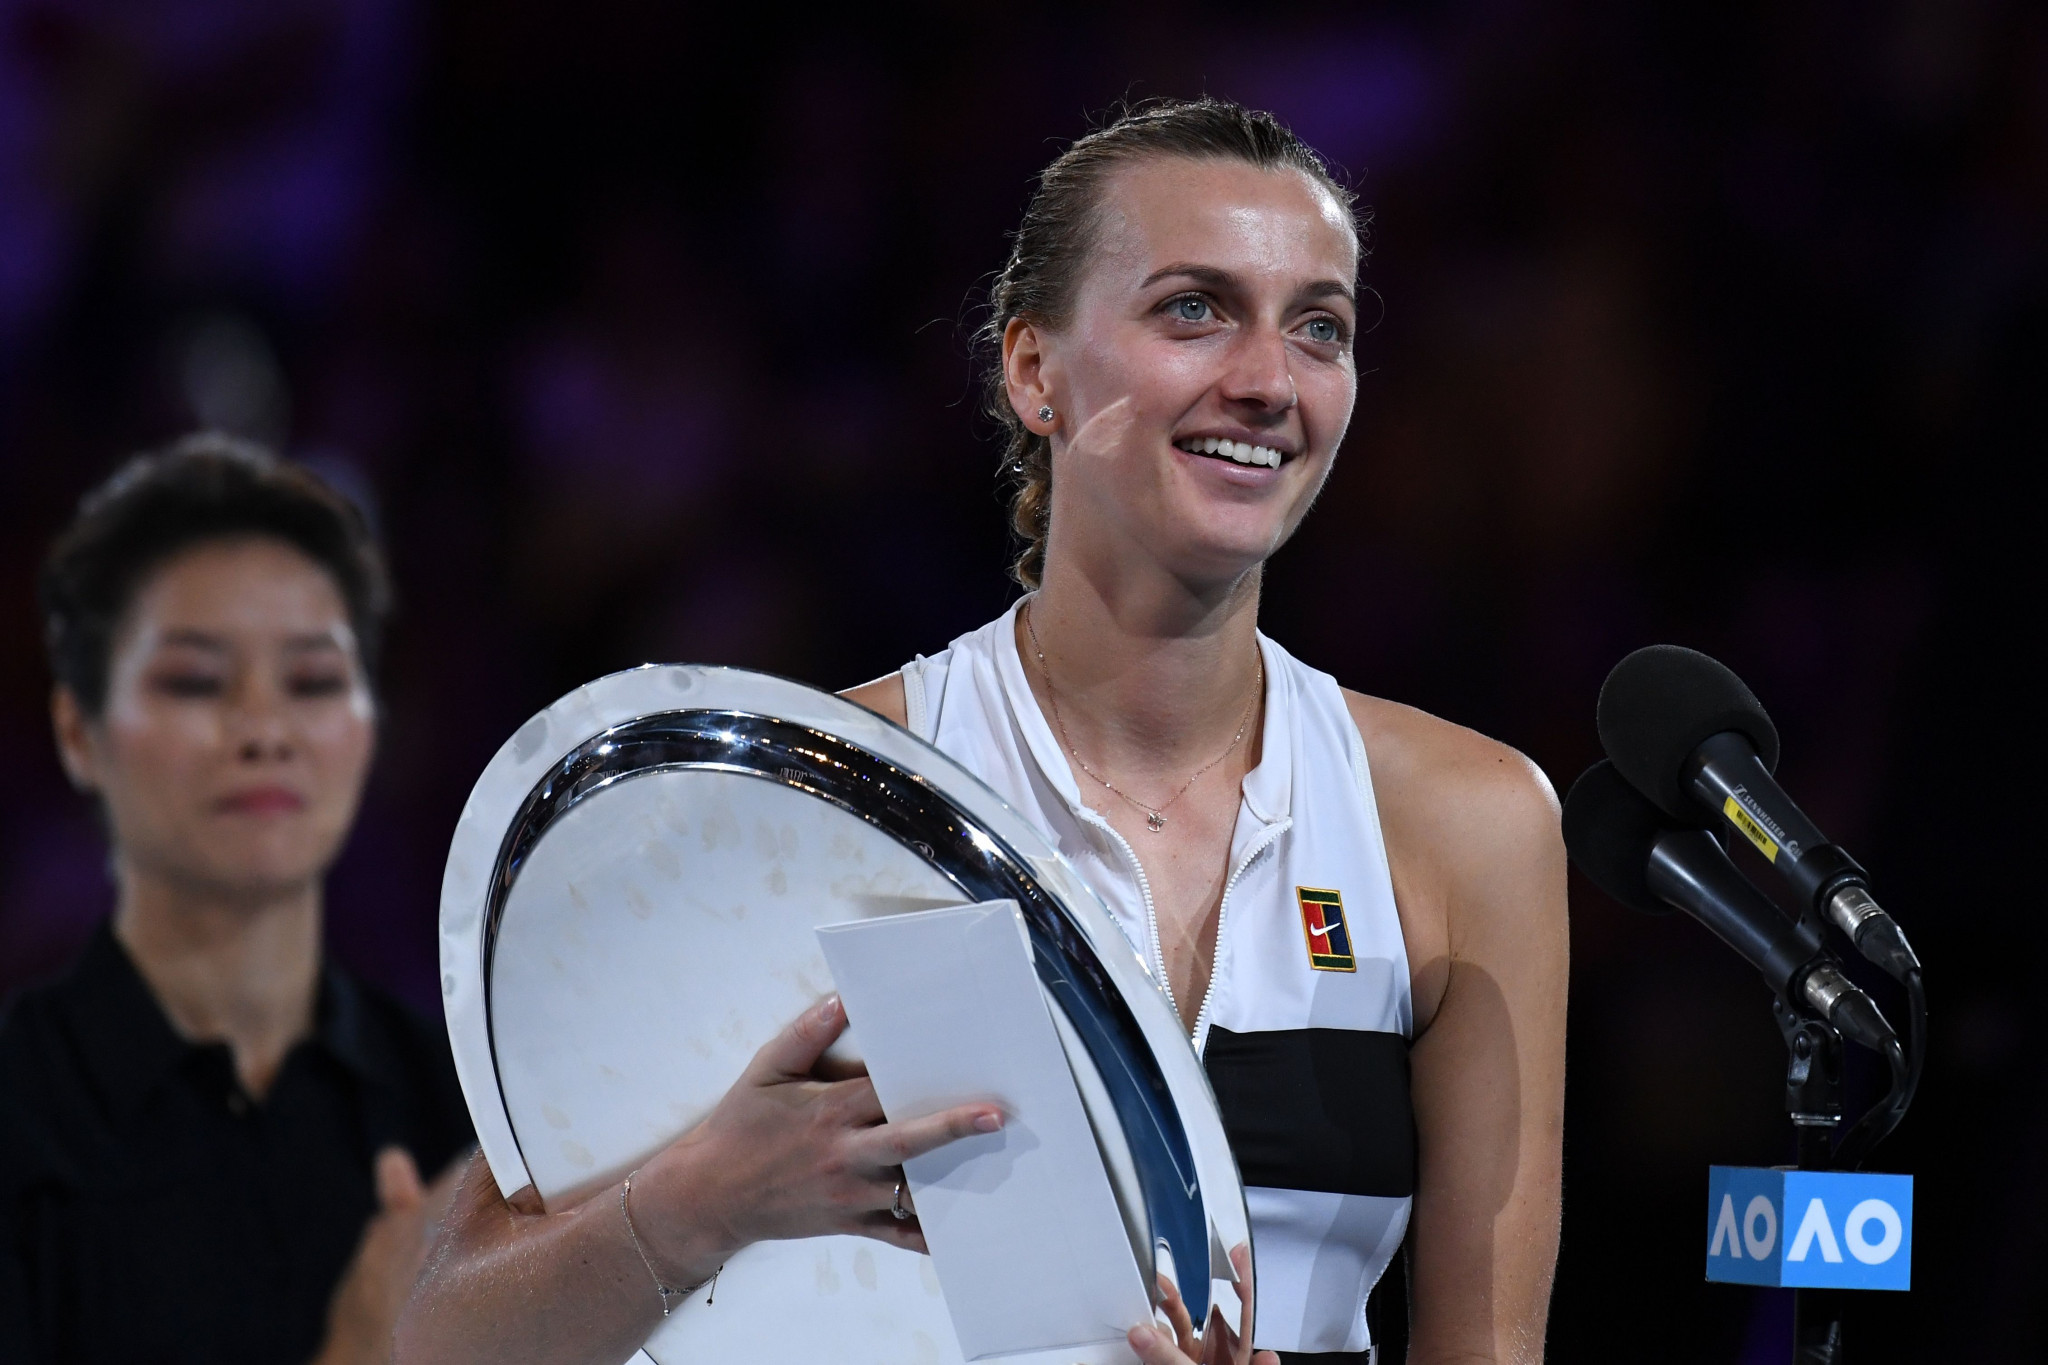 Petra Kvitová had competed in her first Grand Slam final since being injured in a knife attack in 2016 ©Getty Images